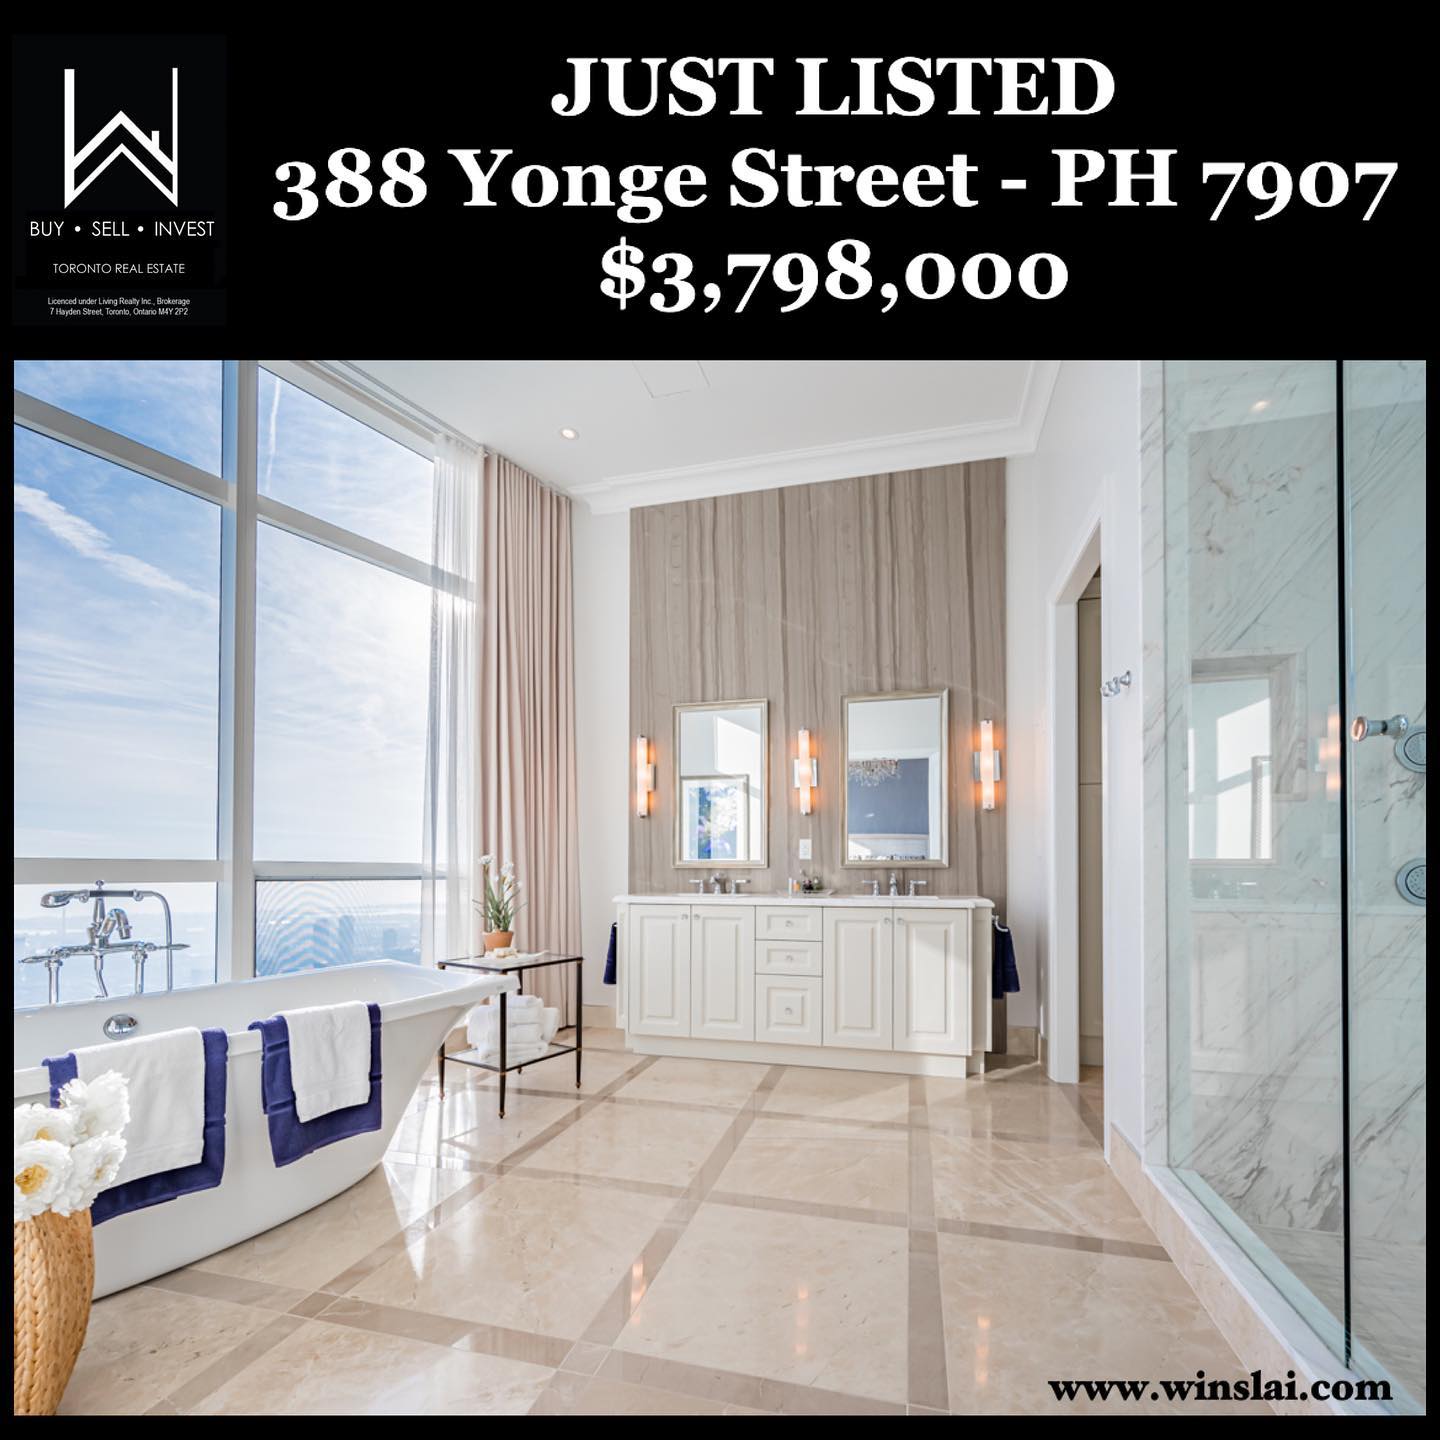 Just Listed flyer for 388 Yonge St Ph 7907.